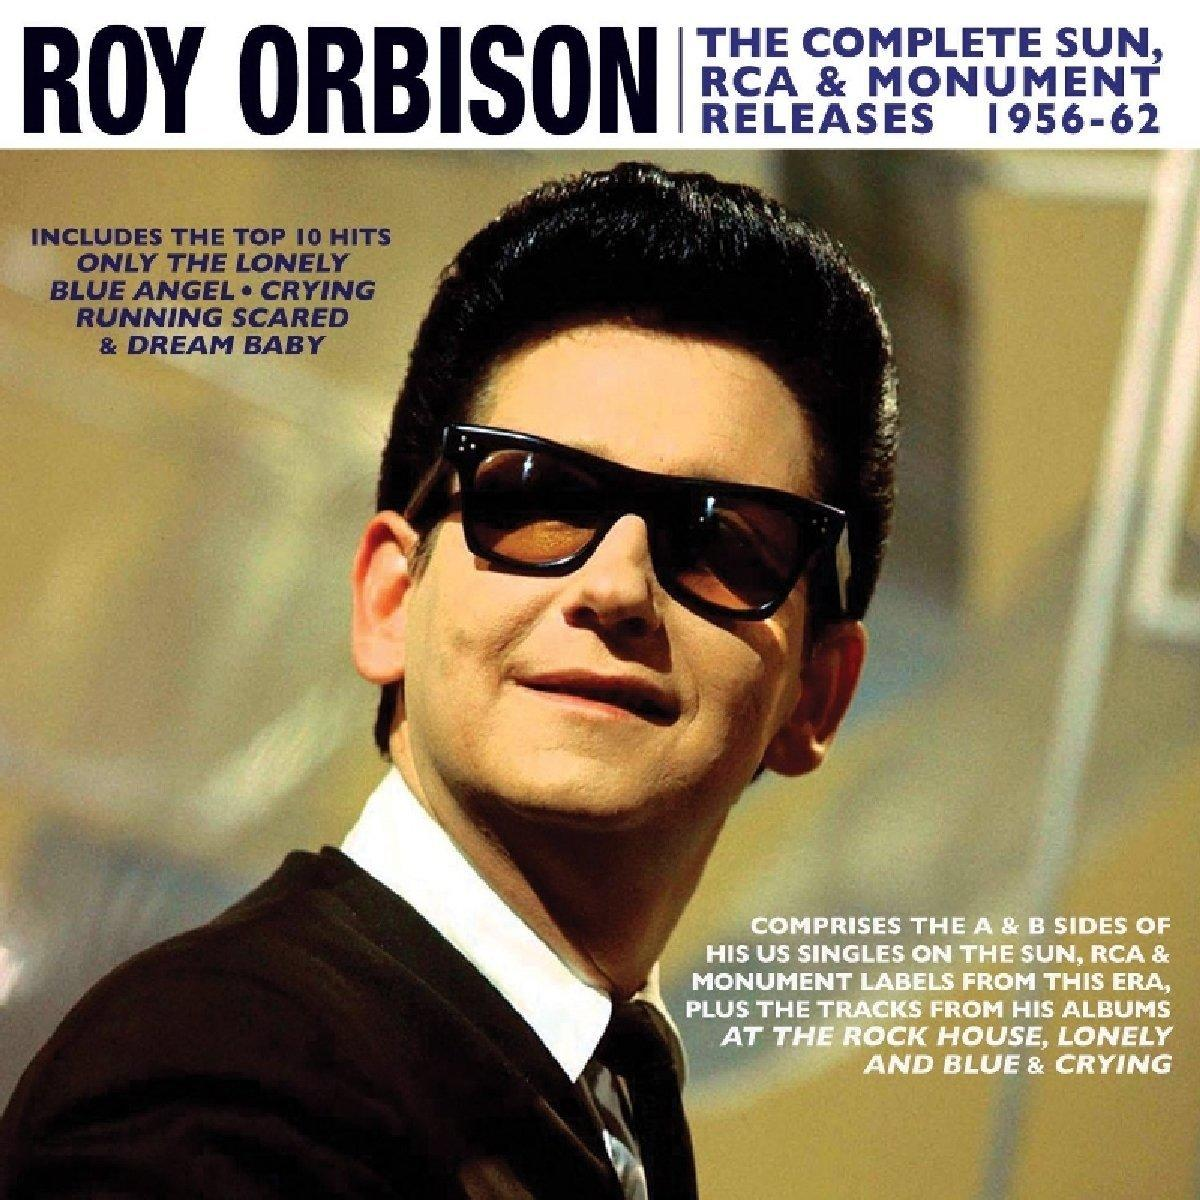 1956-62 Complete Releases RCA Sun, Orbison (CD) - The Monument & - Roy